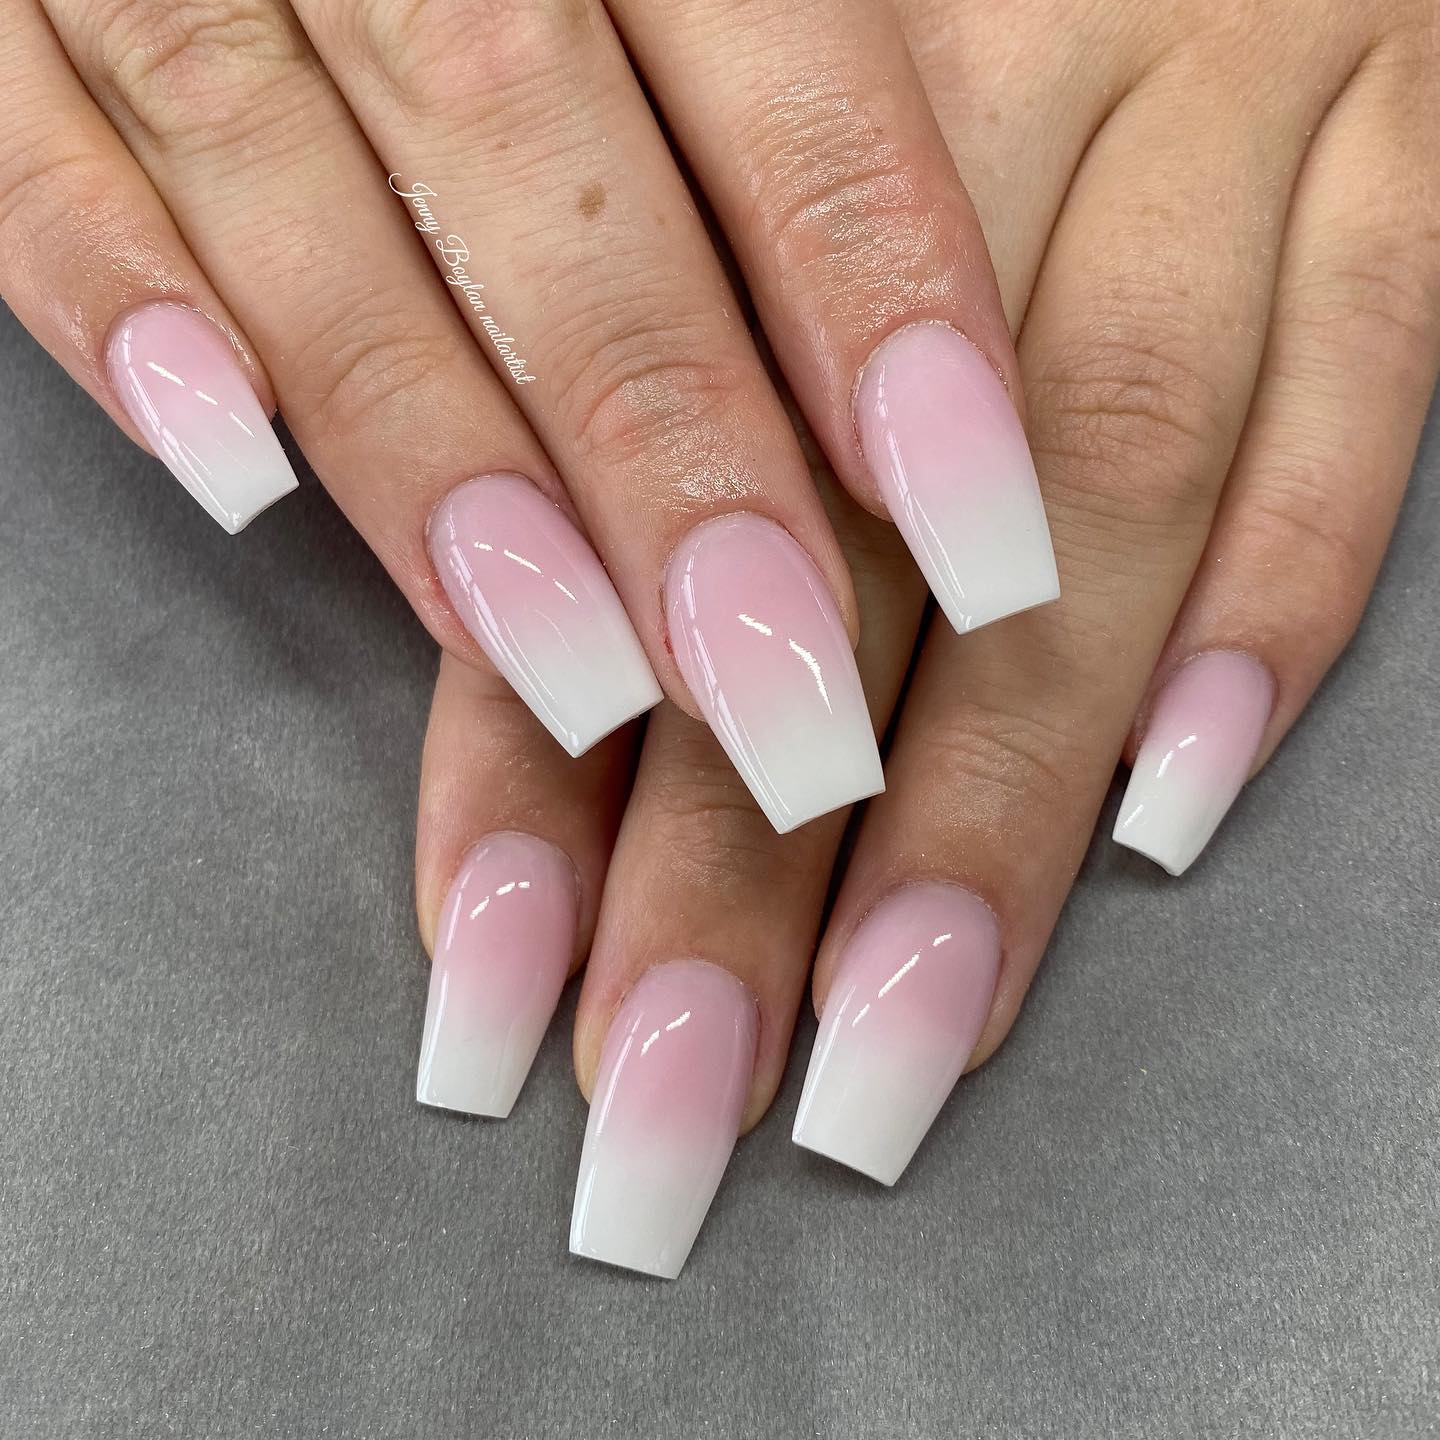 Gel nails help you get a quite fabulous look that it is not hard to say they take your nails to a different level. As you see above, the transition between pink and white is super-neat. Plus, these two colors are so matching.